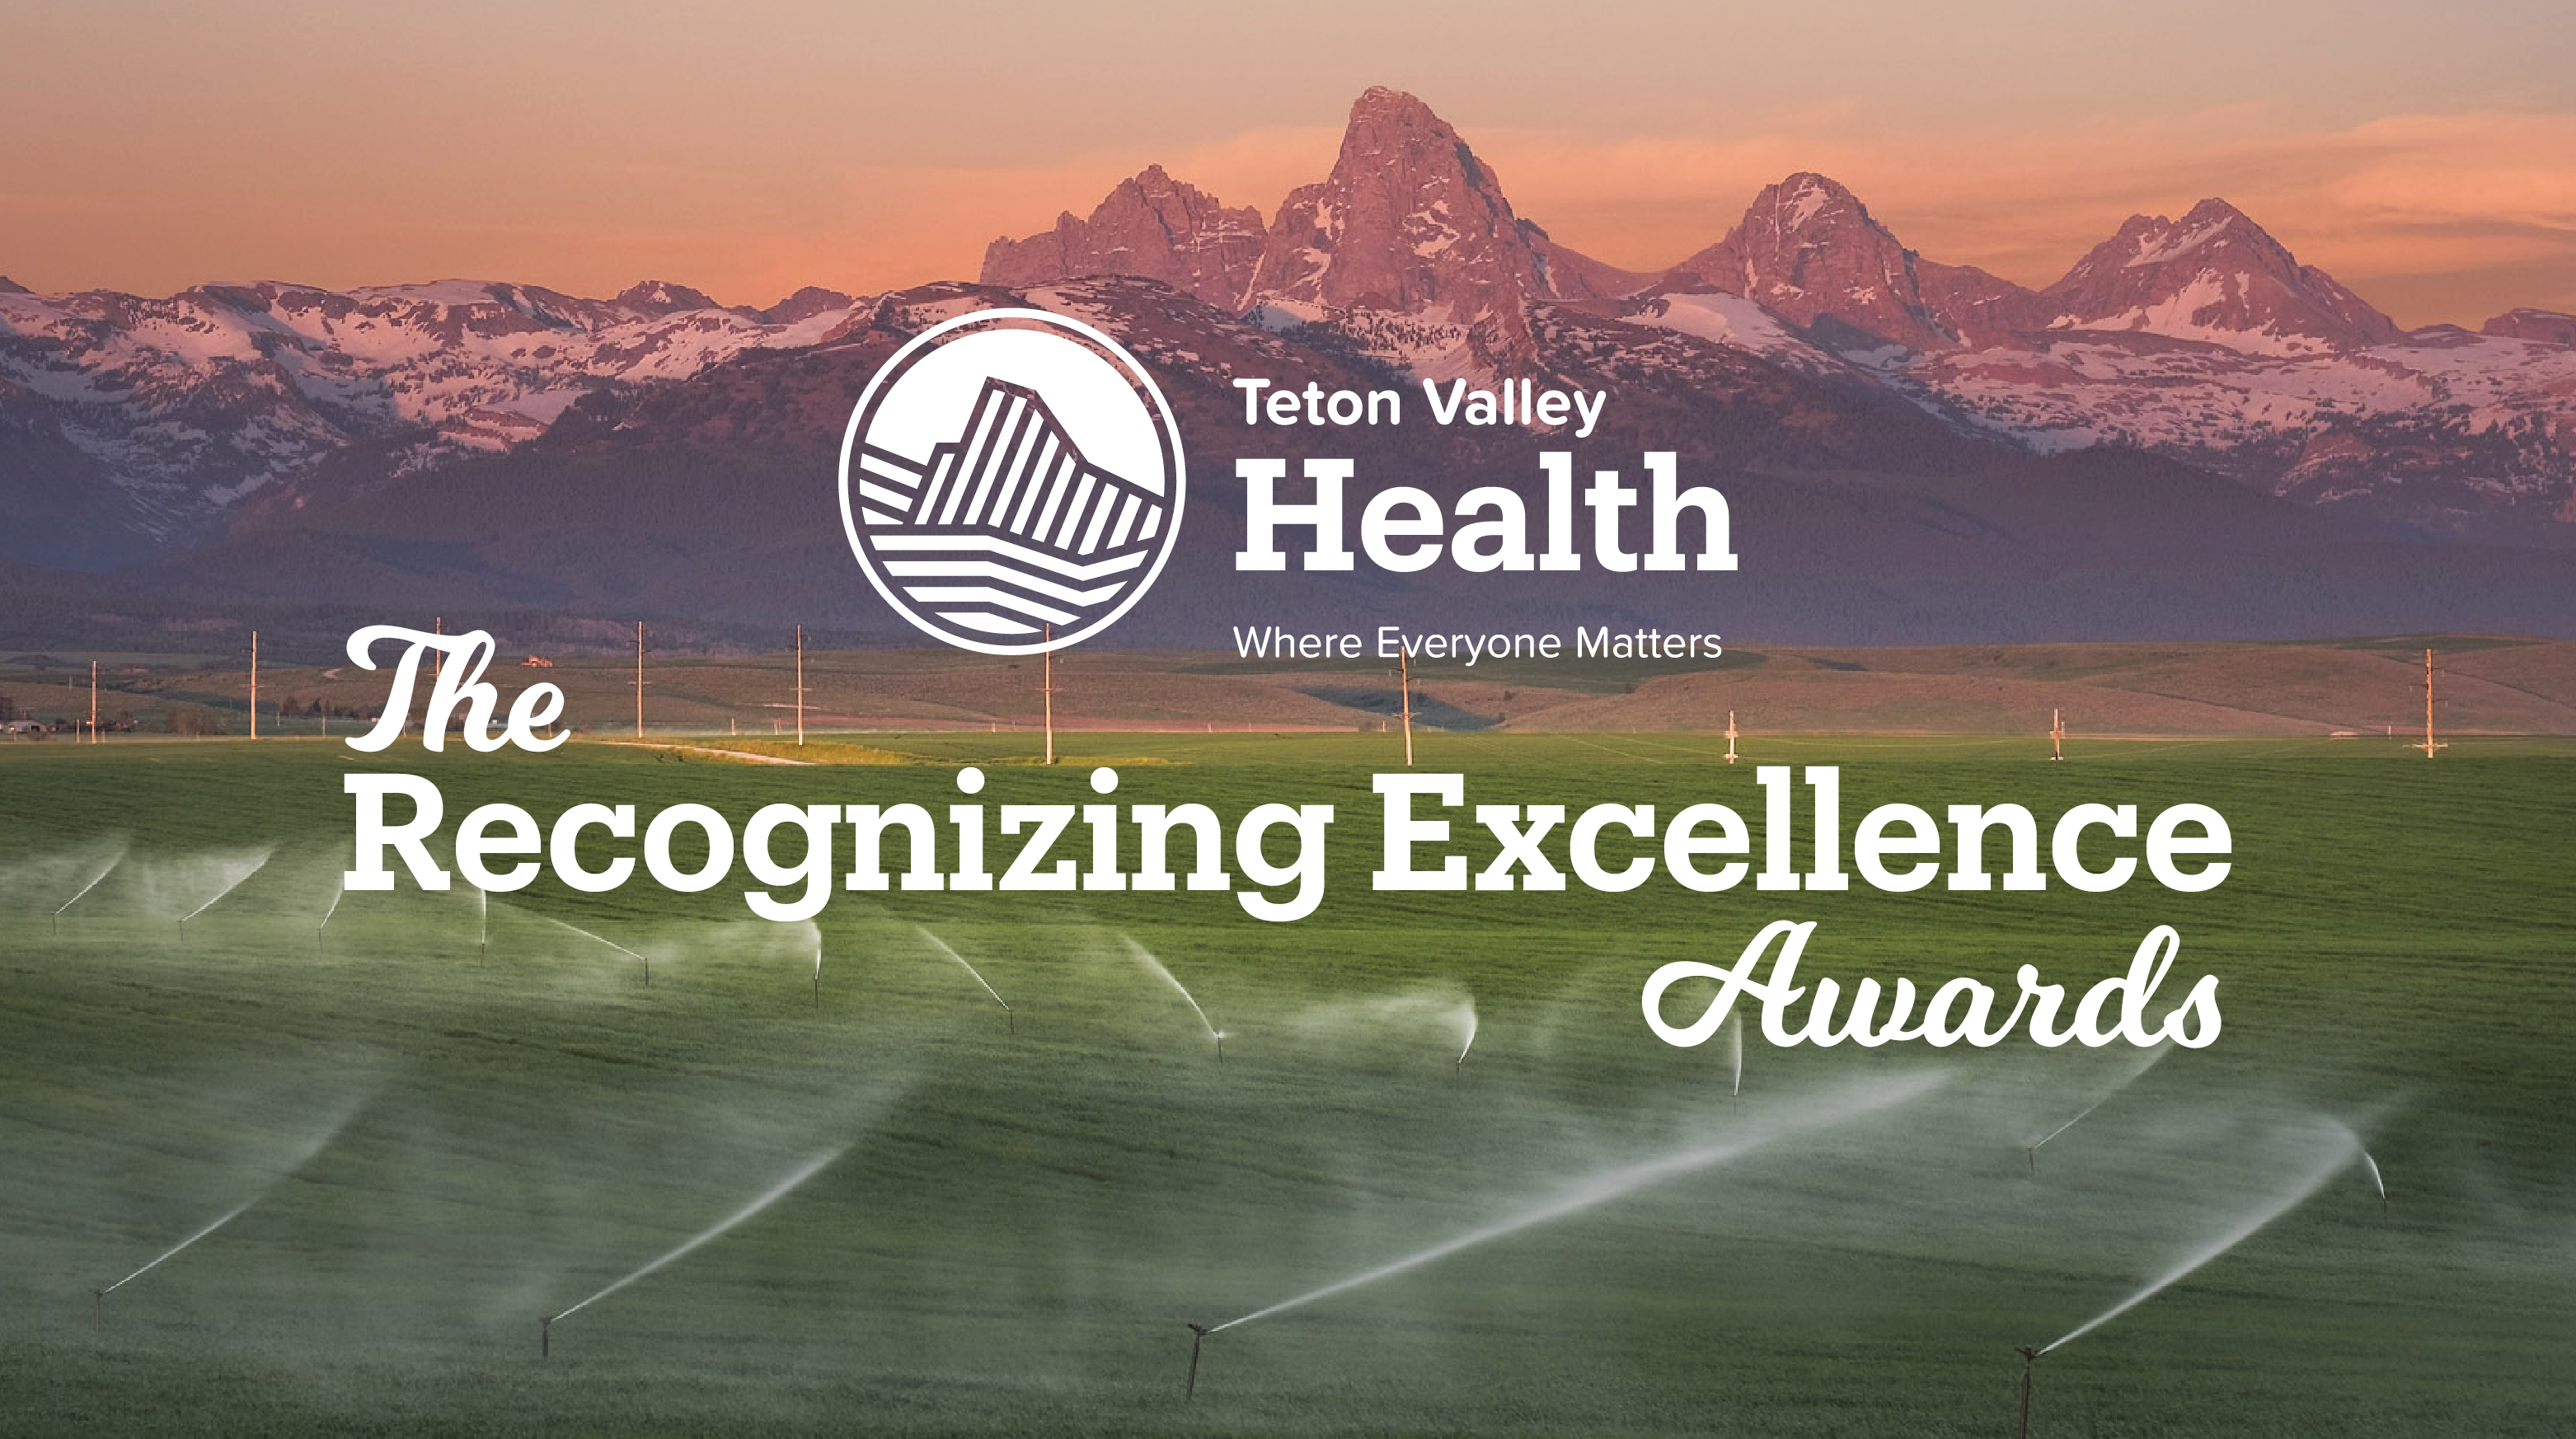 Teton Valley Health Introduces Employee Recognition Program, The Recognizing Excellence AwardsTeton Valley Health Introduces Employee Recognition Program, The Recognizing Excellence Awards